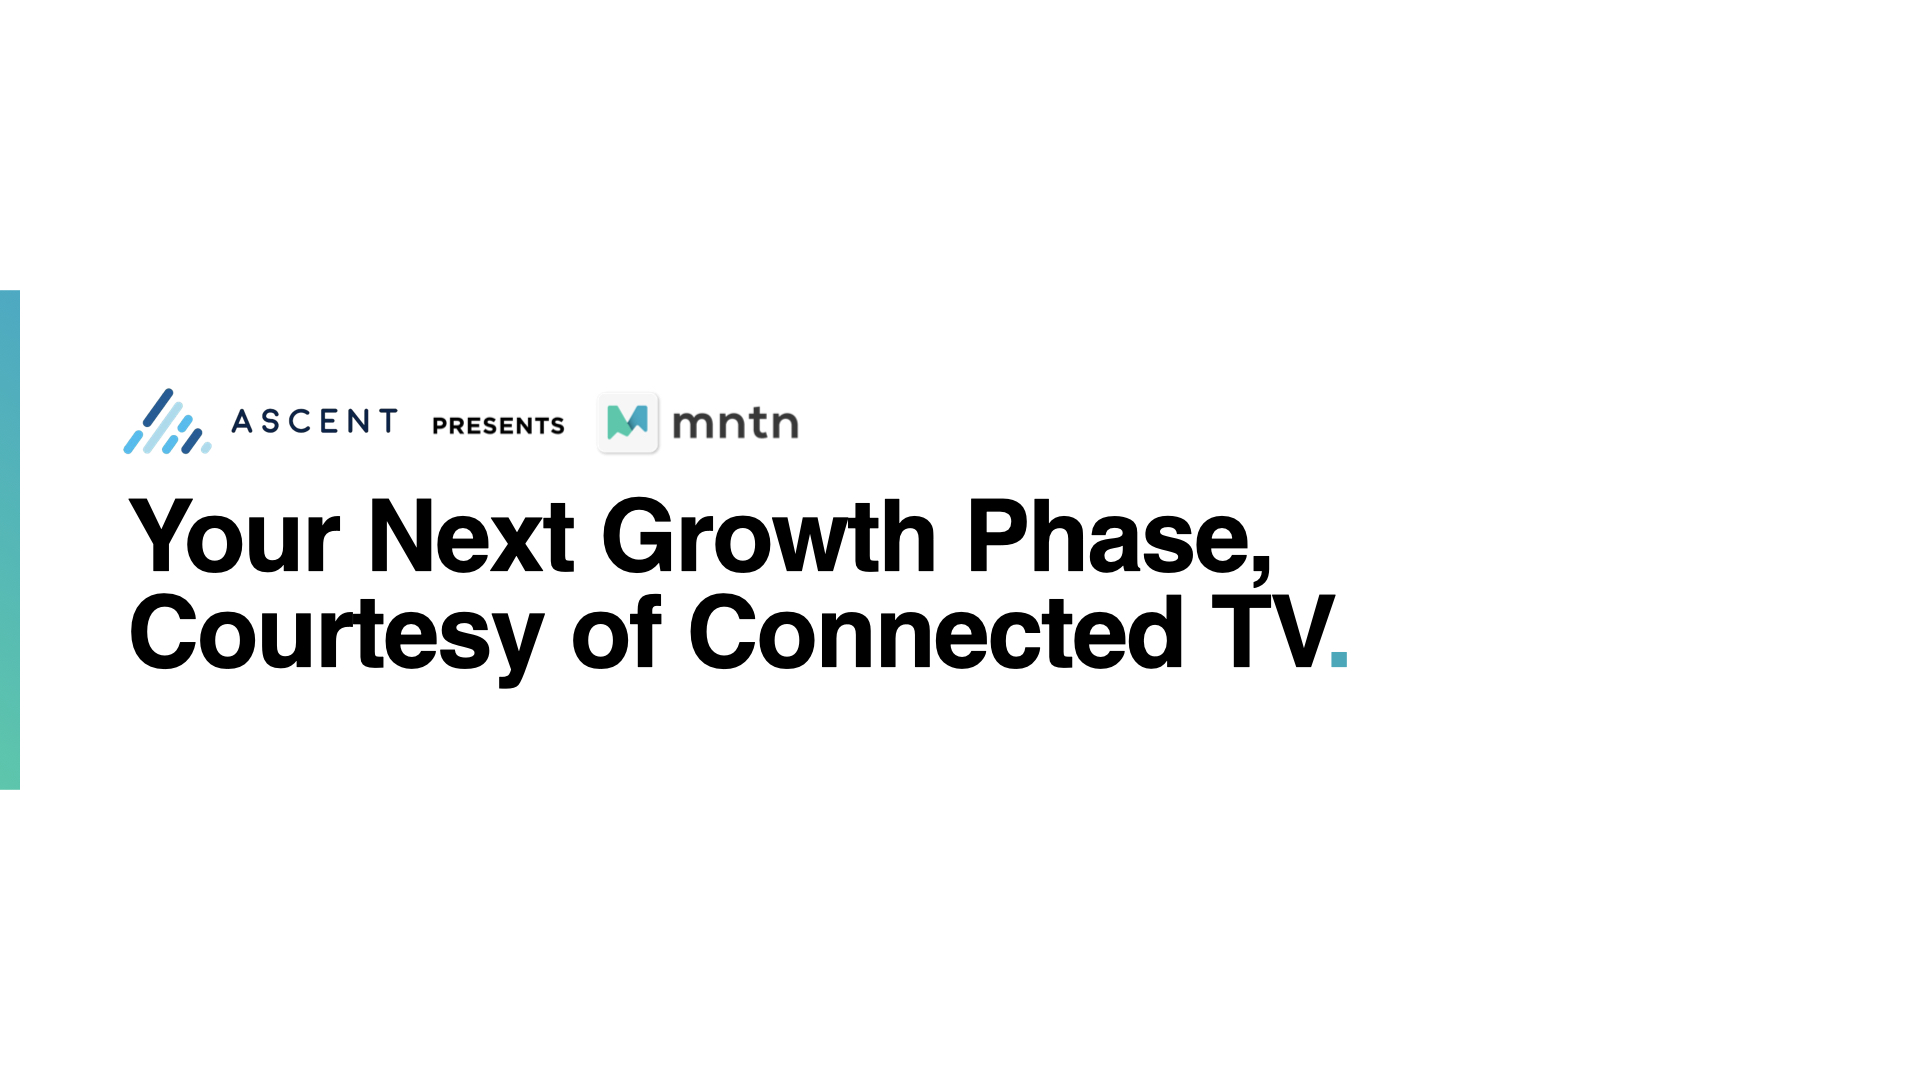 Your Next Growth Phase, Courtesy of Connected TV